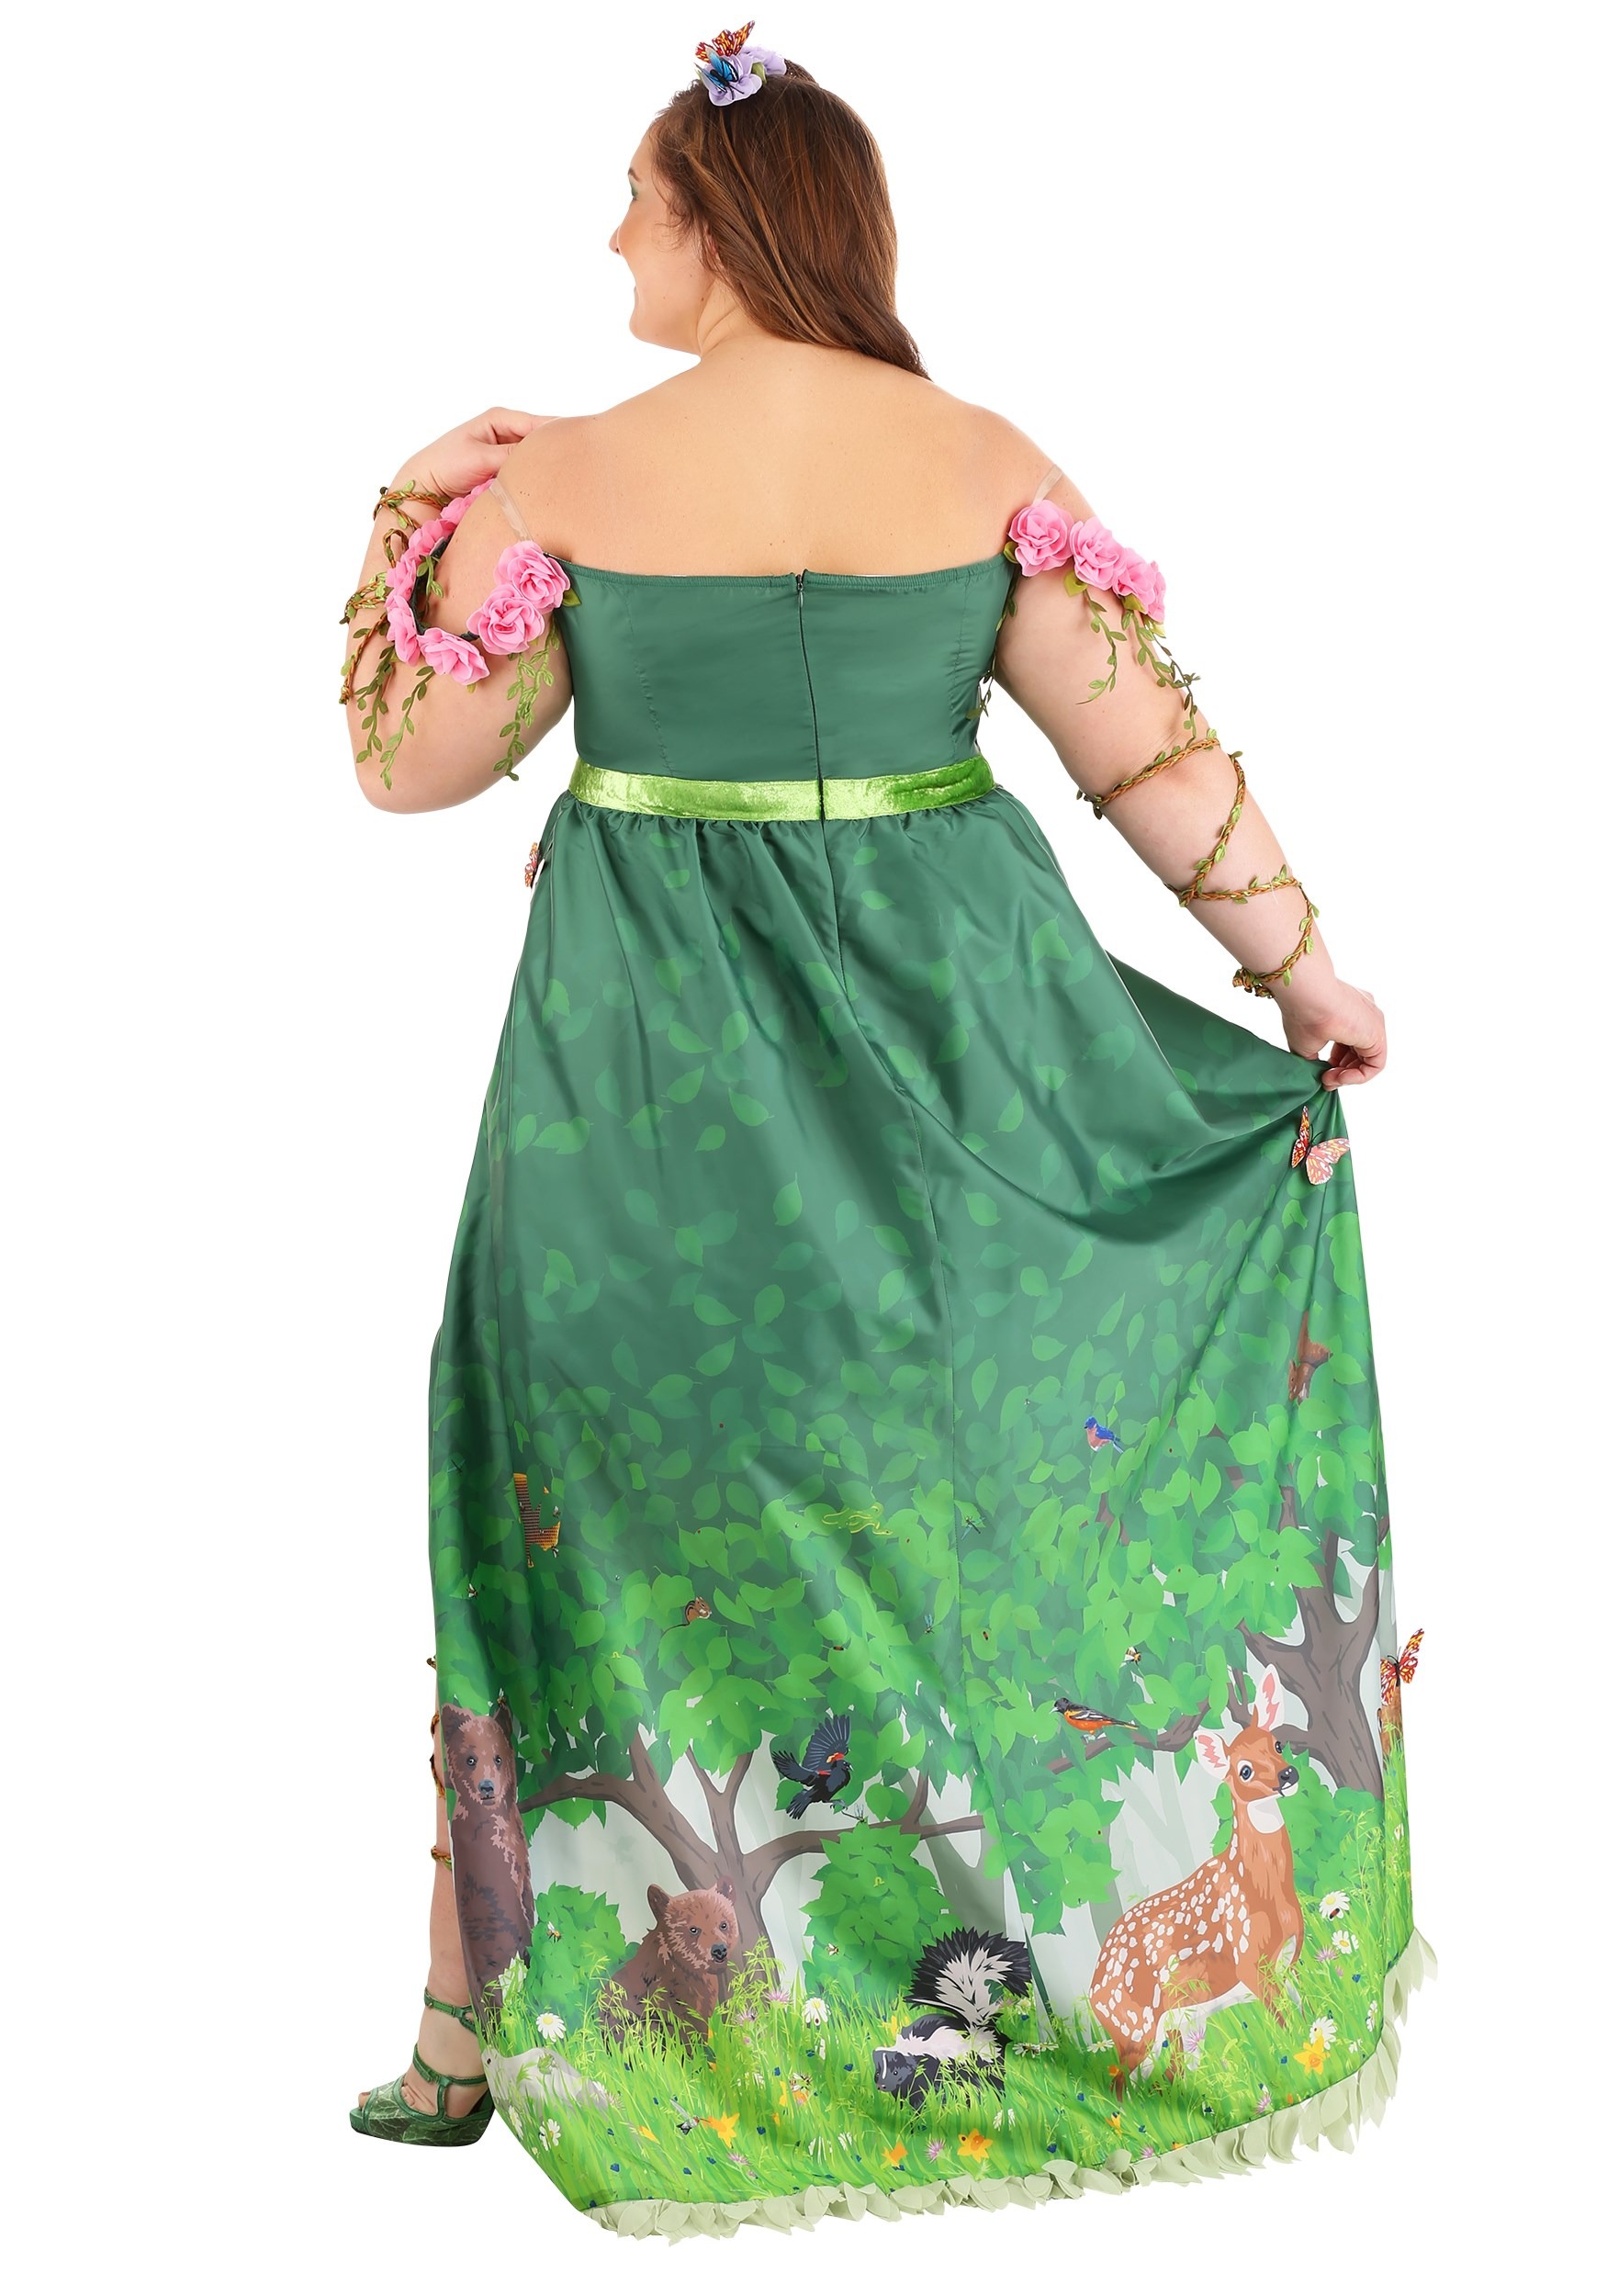 Plus Size Mother Nature Costume for Women